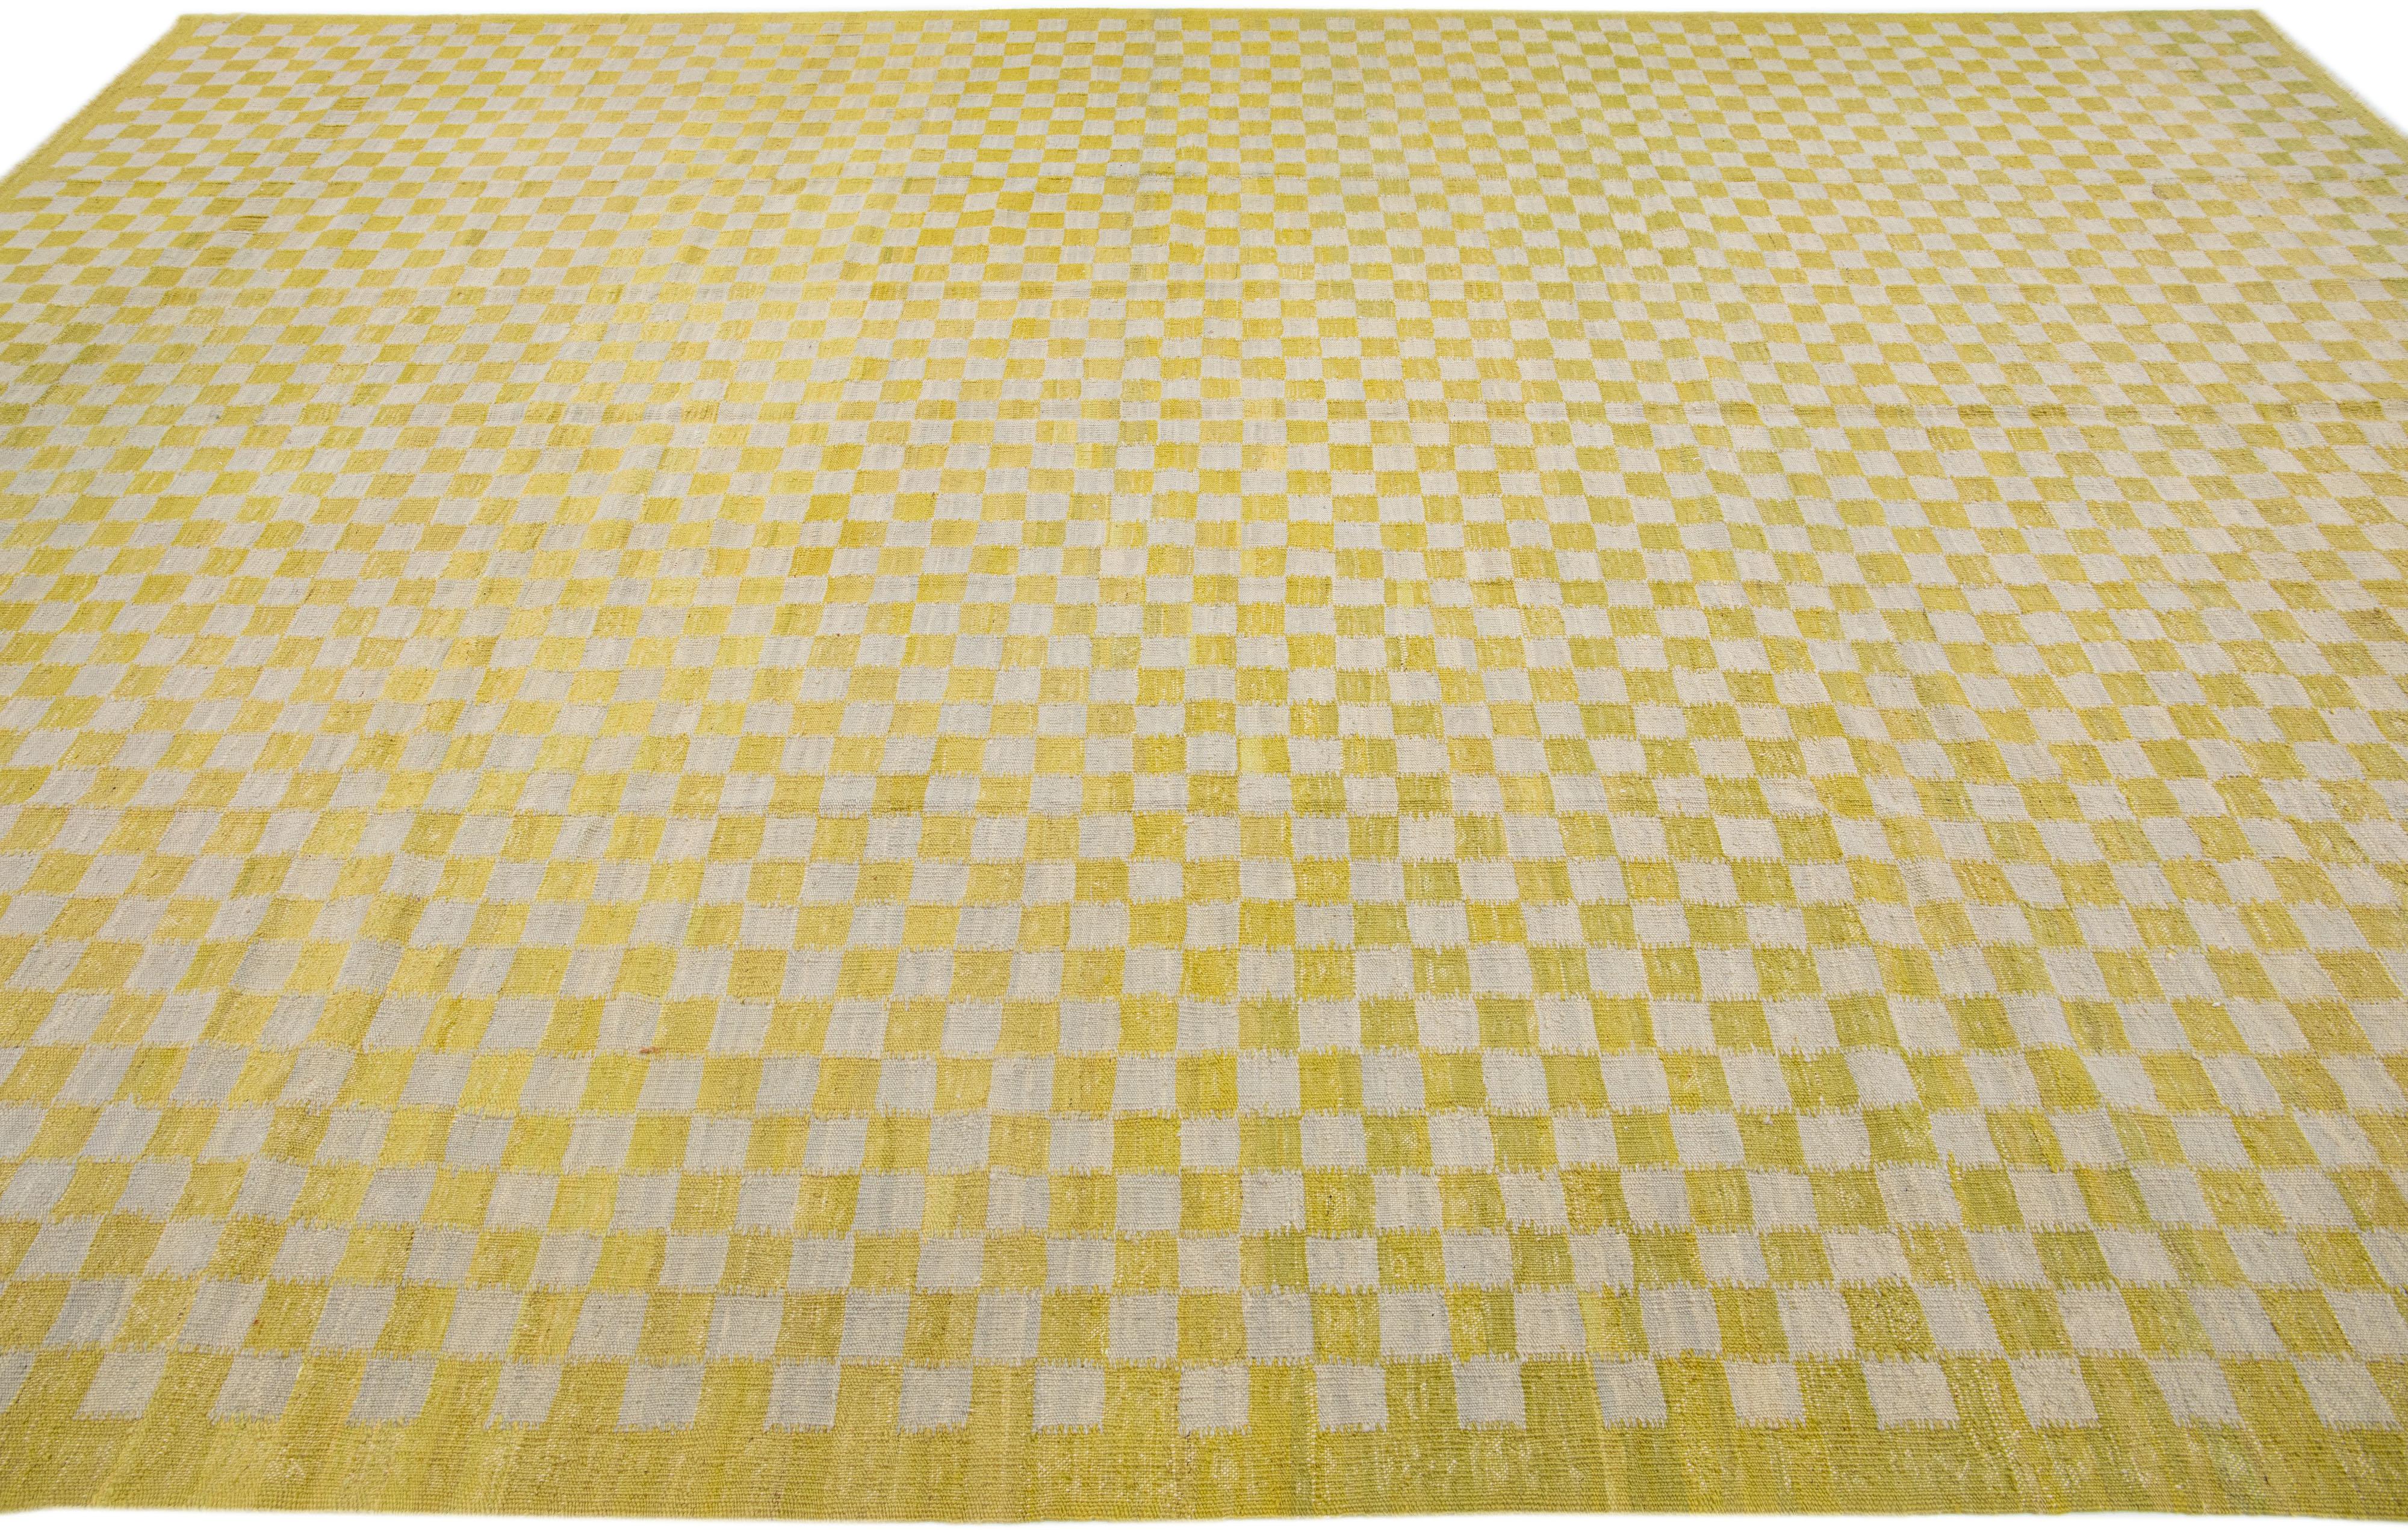 Vintage Kilim Yellow Handmade Wool Rug with Checker Motif In Excellent Condition For Sale In Norwalk, CT